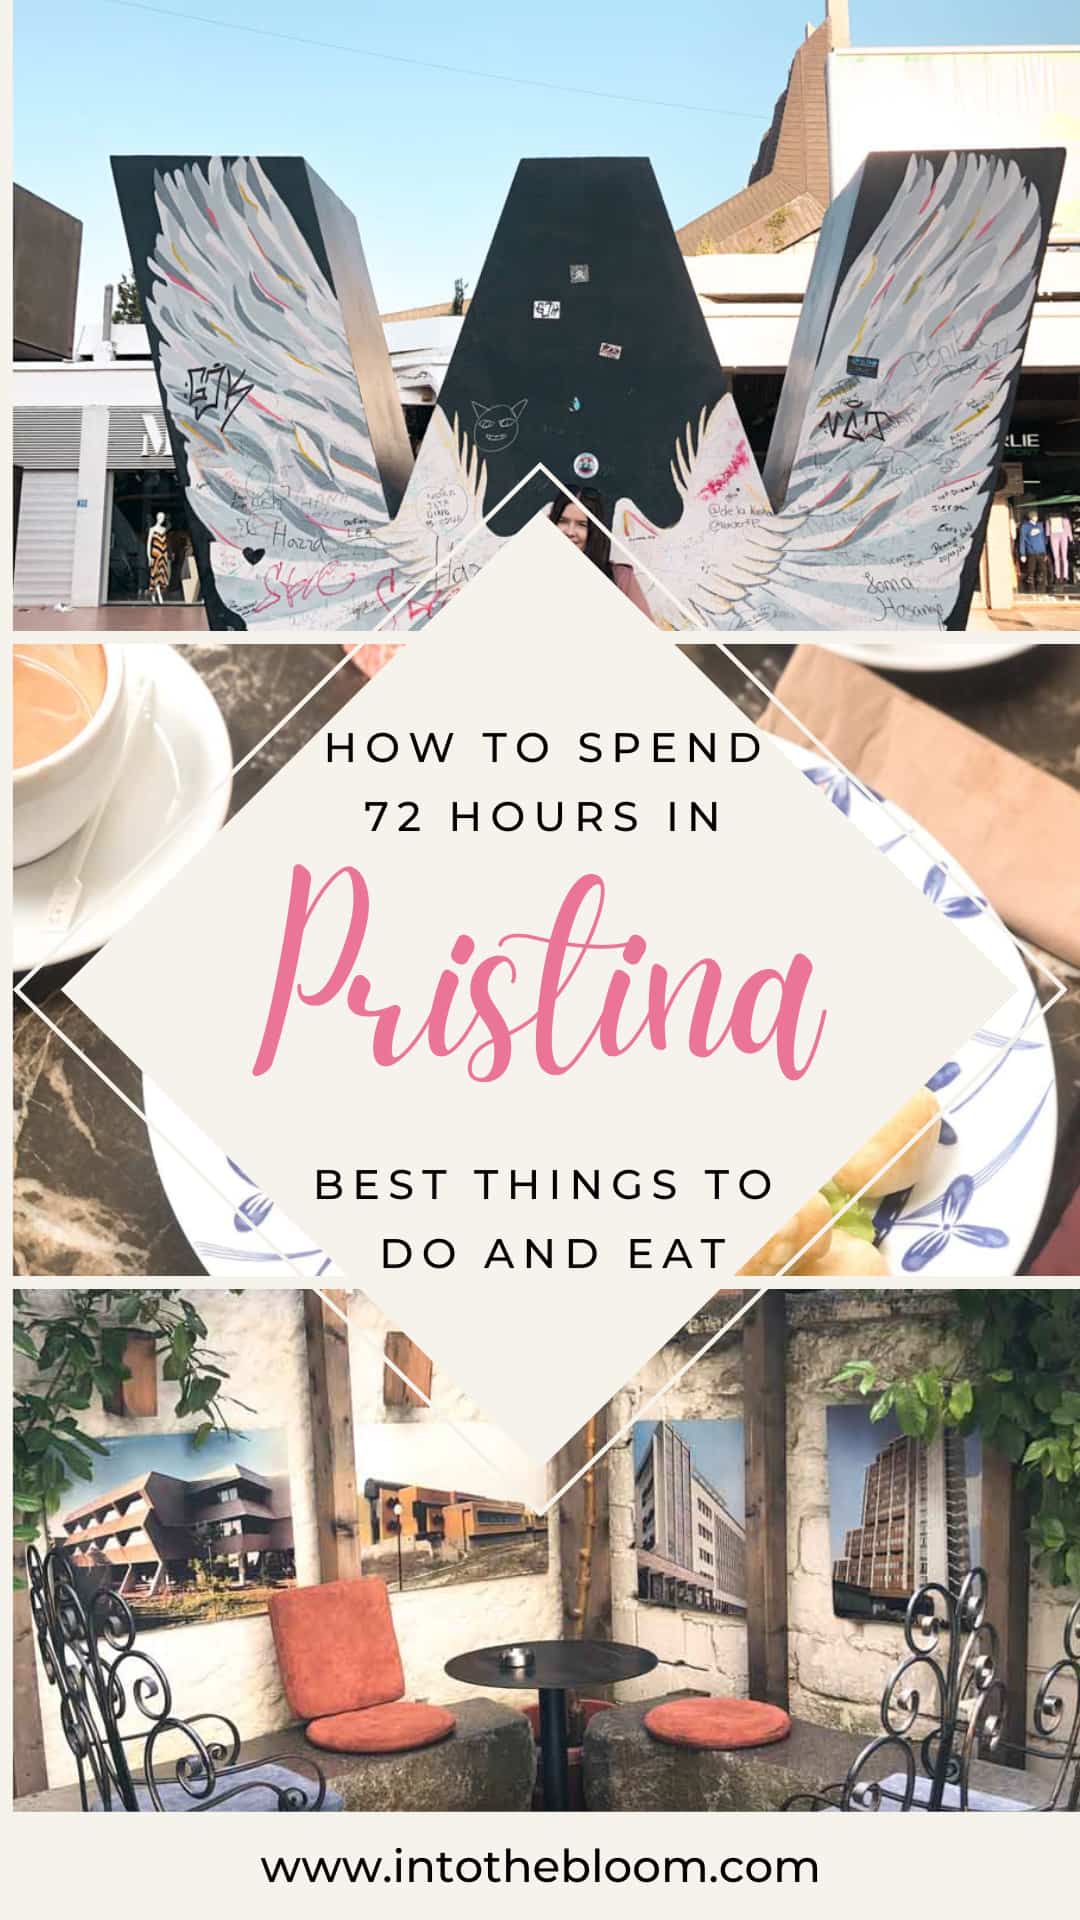 How to spend 72 hours in Pristina, Kosovo - Best things to do, see, and eat